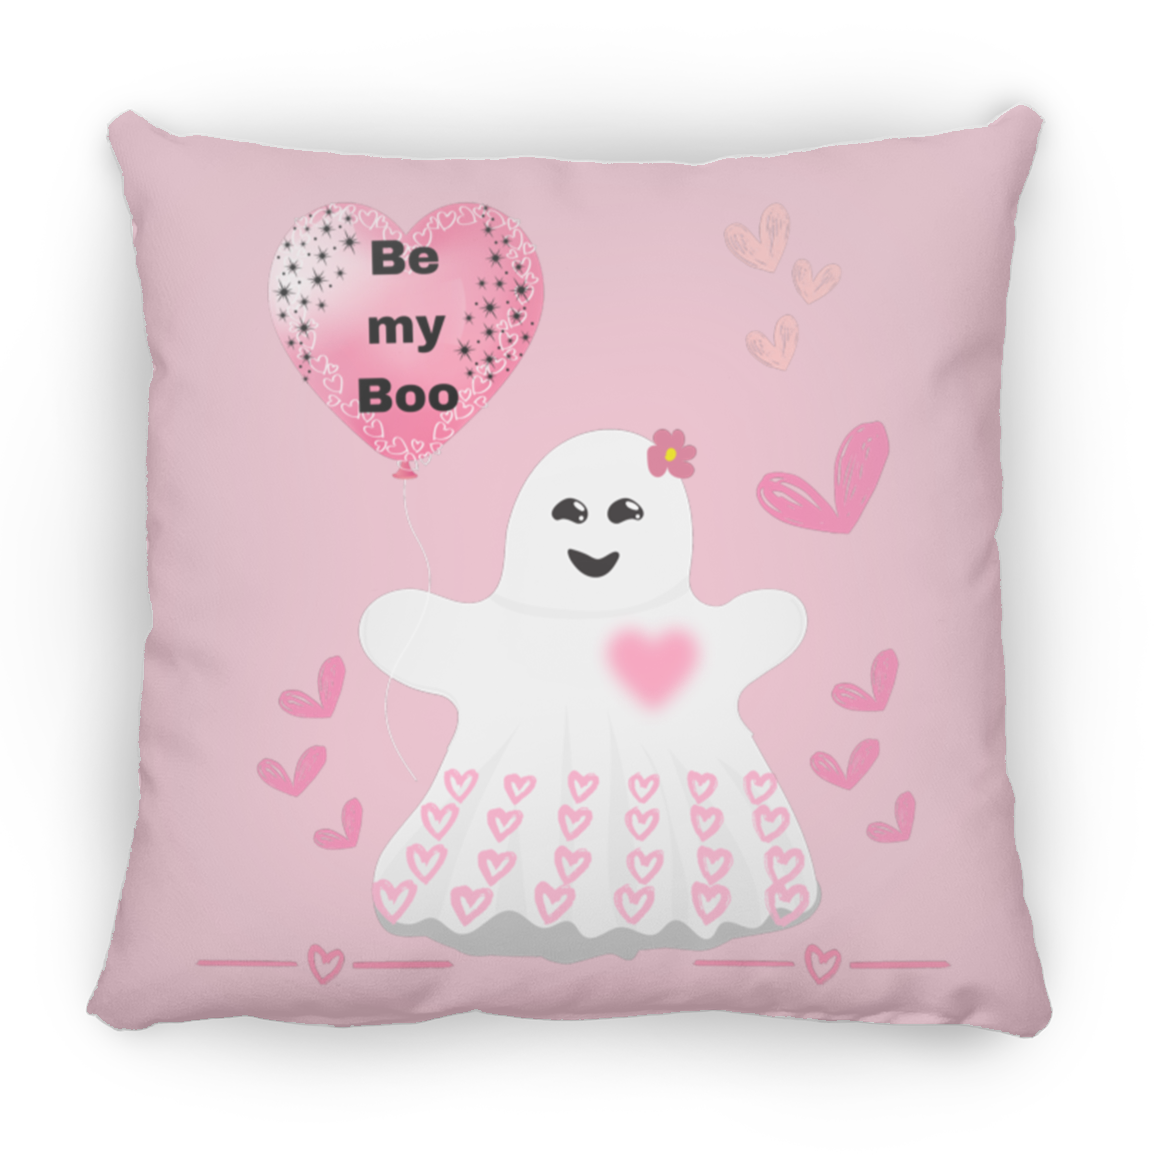 Be my Boo Square Pillow